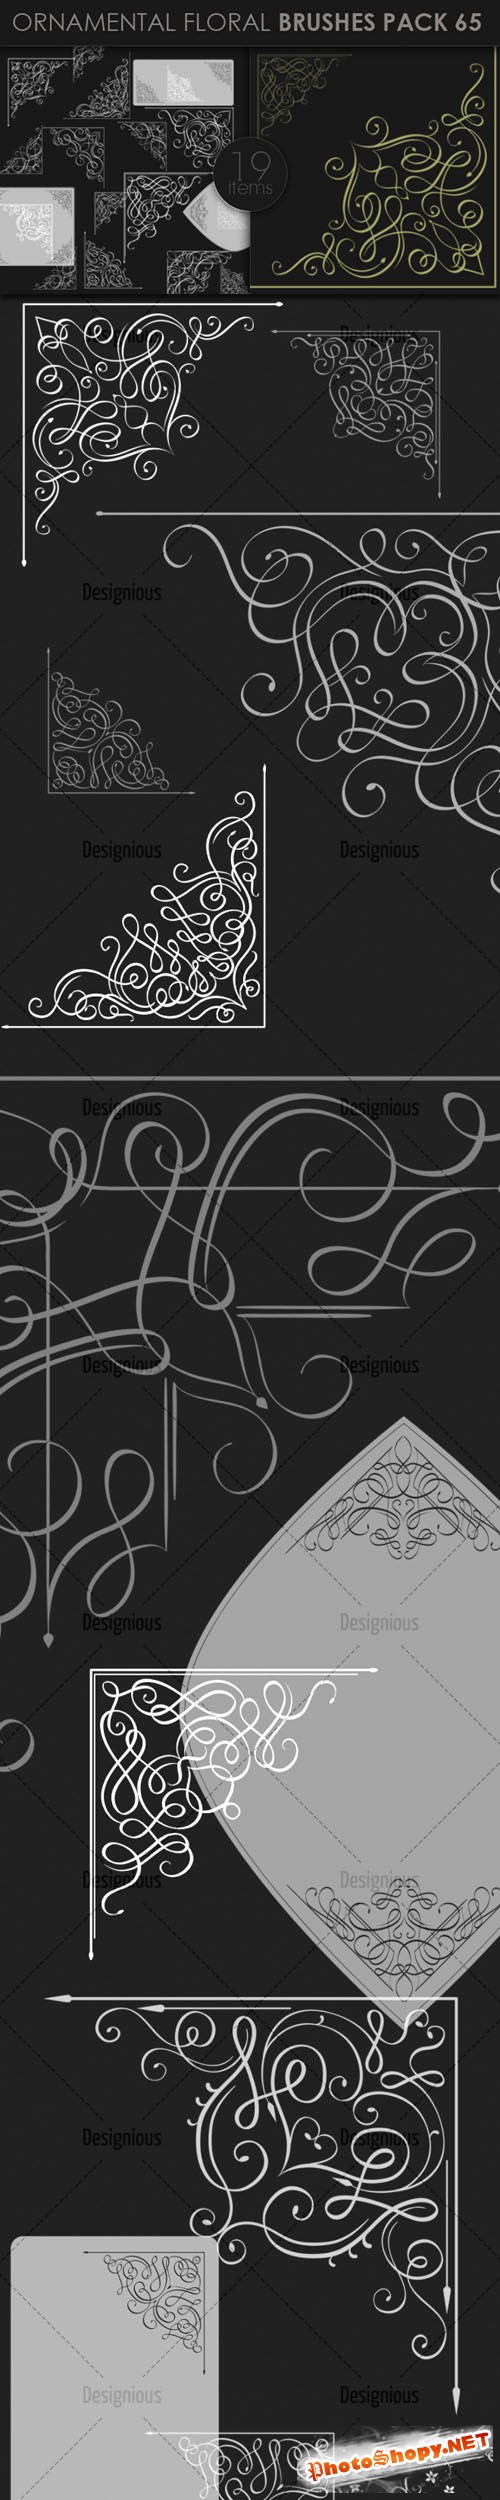 Ornamental Floral Photoshop Brushes Pack 65